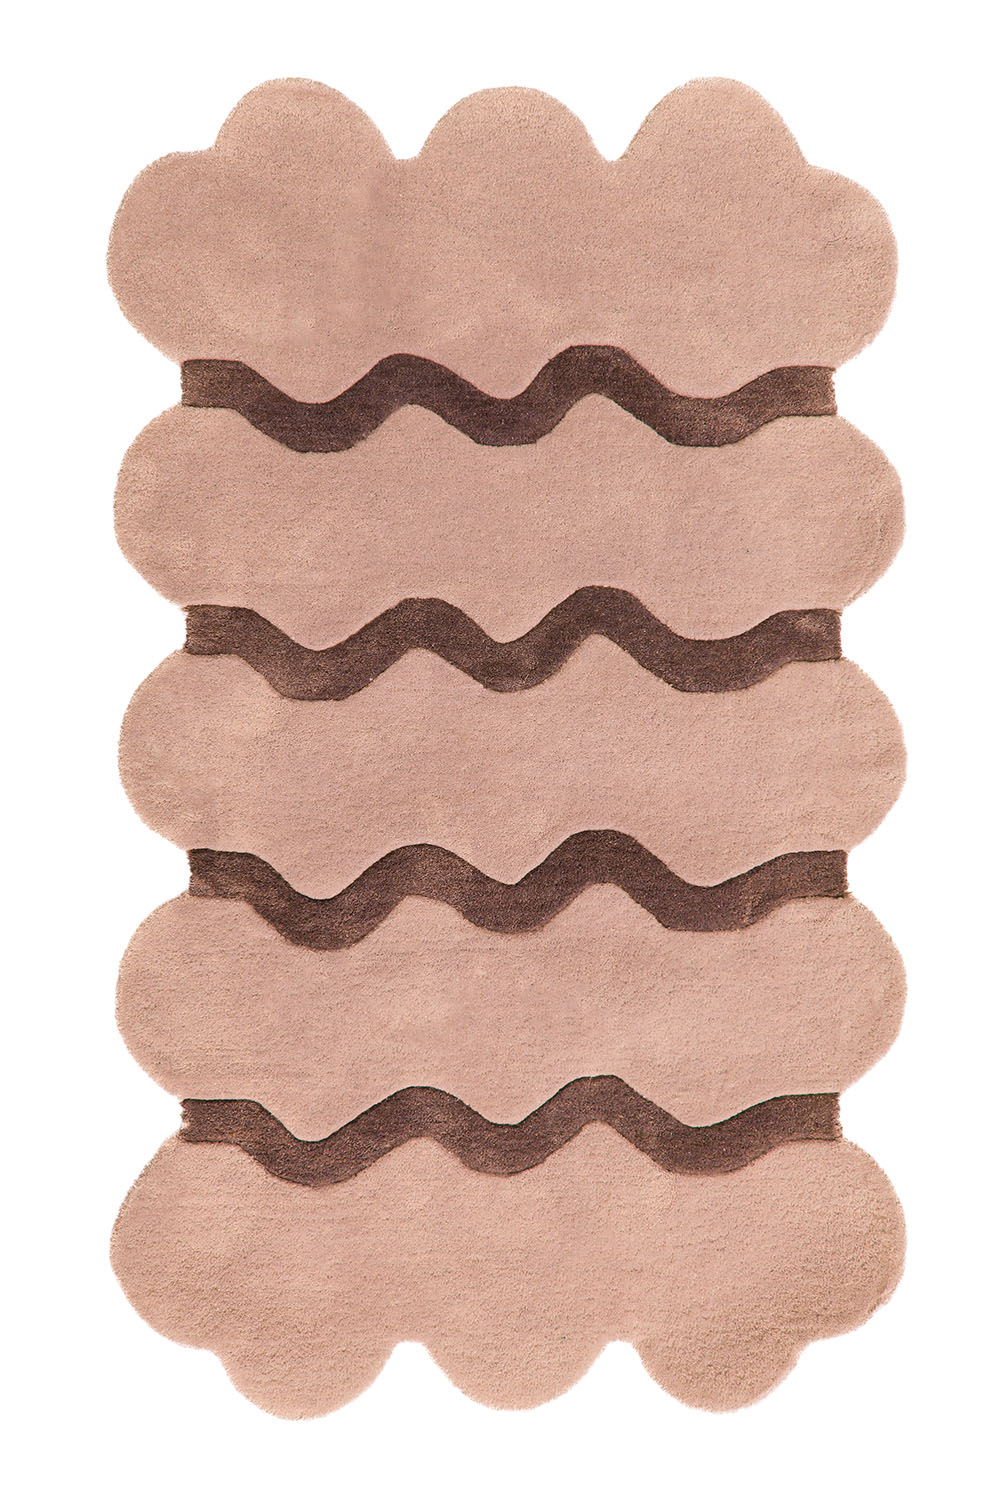 Sculpted Edge Hand Tufted Wool Rug in Brown by Jubi